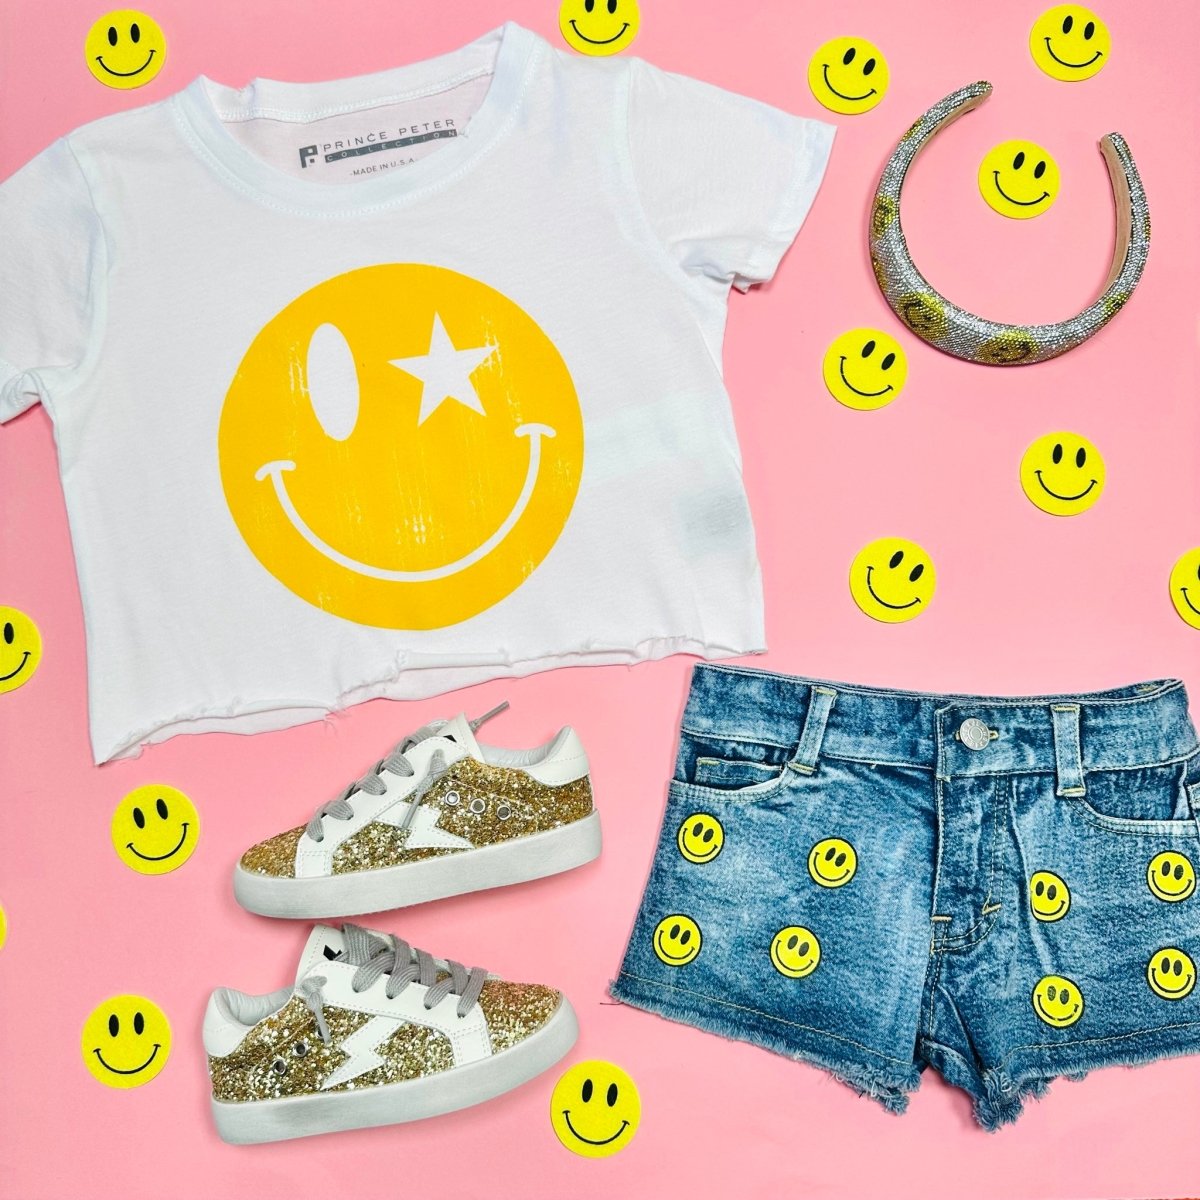 SMILEY FACE DENIM SHORTS - FLOWERS BY ZOE